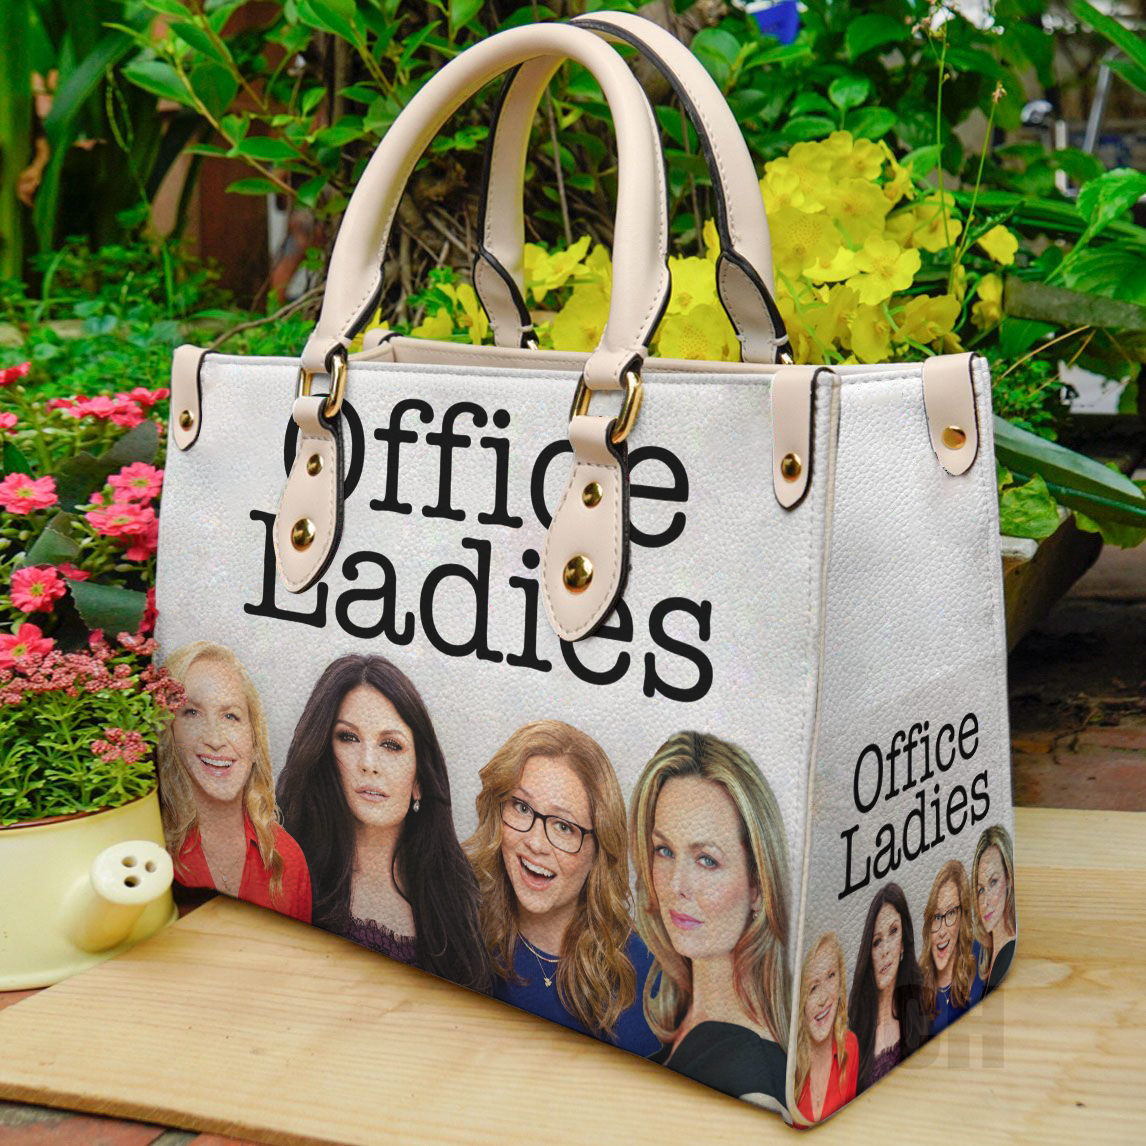 Office Ladies Podcast Women Leather Hand Bag